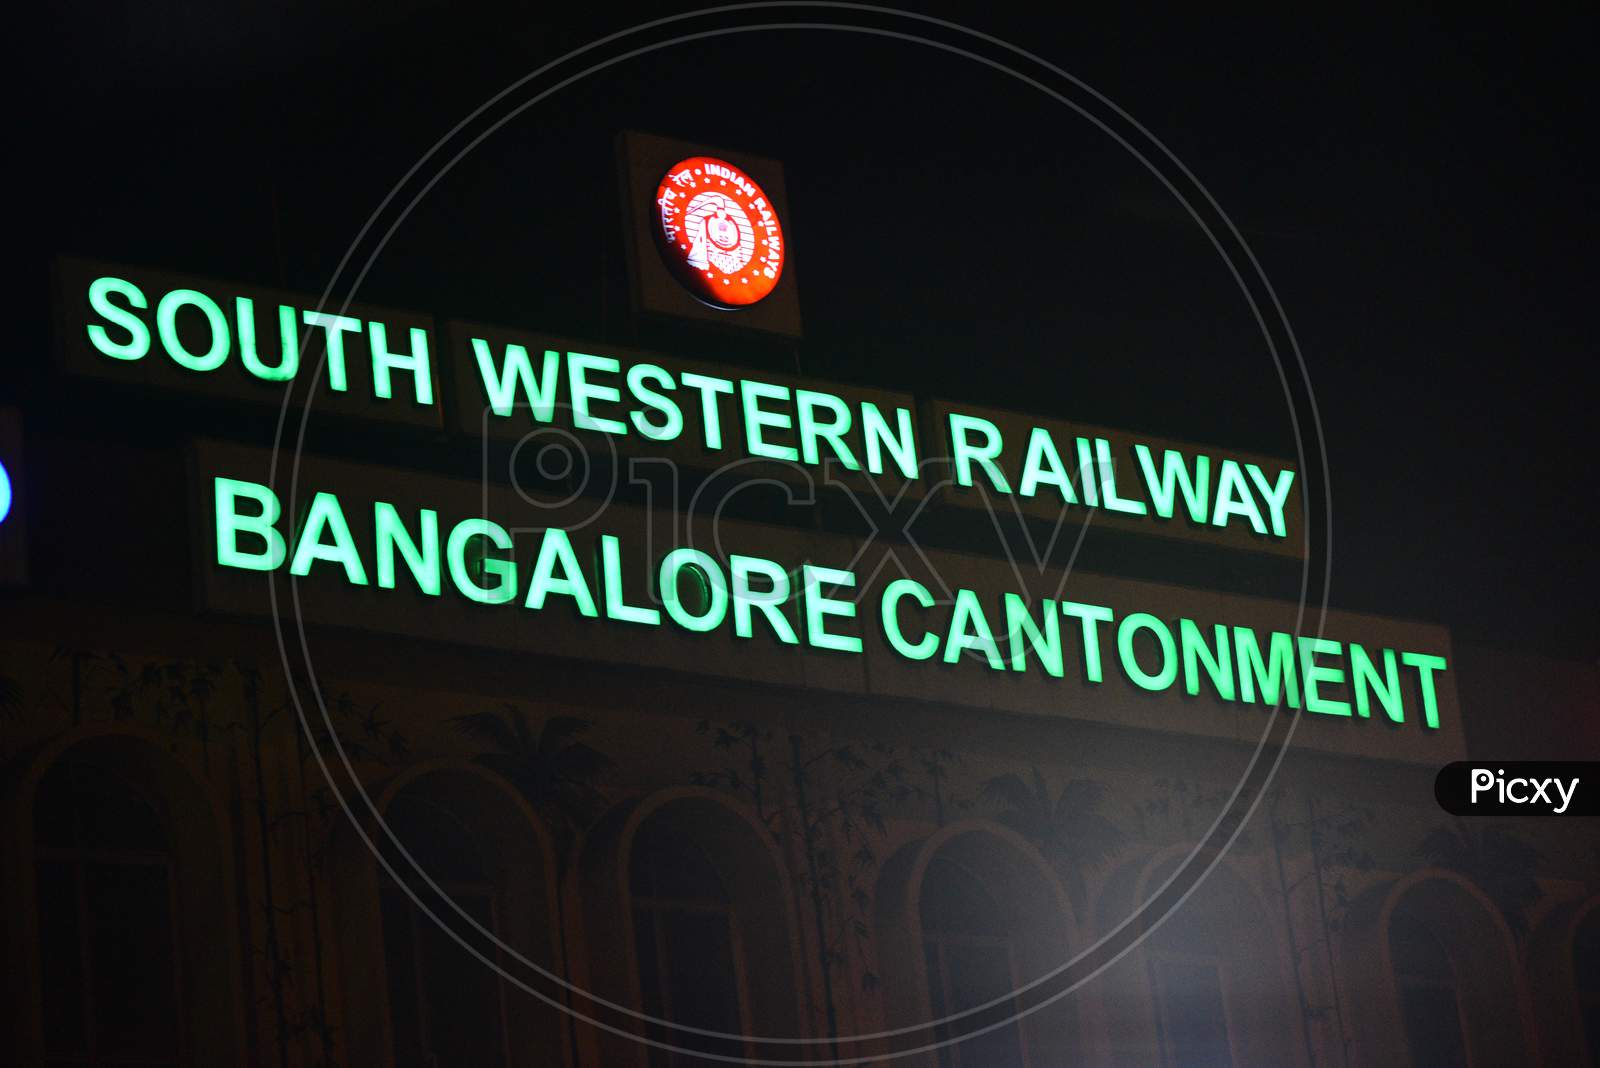 South Western Railway, Bangalore Cantonment.